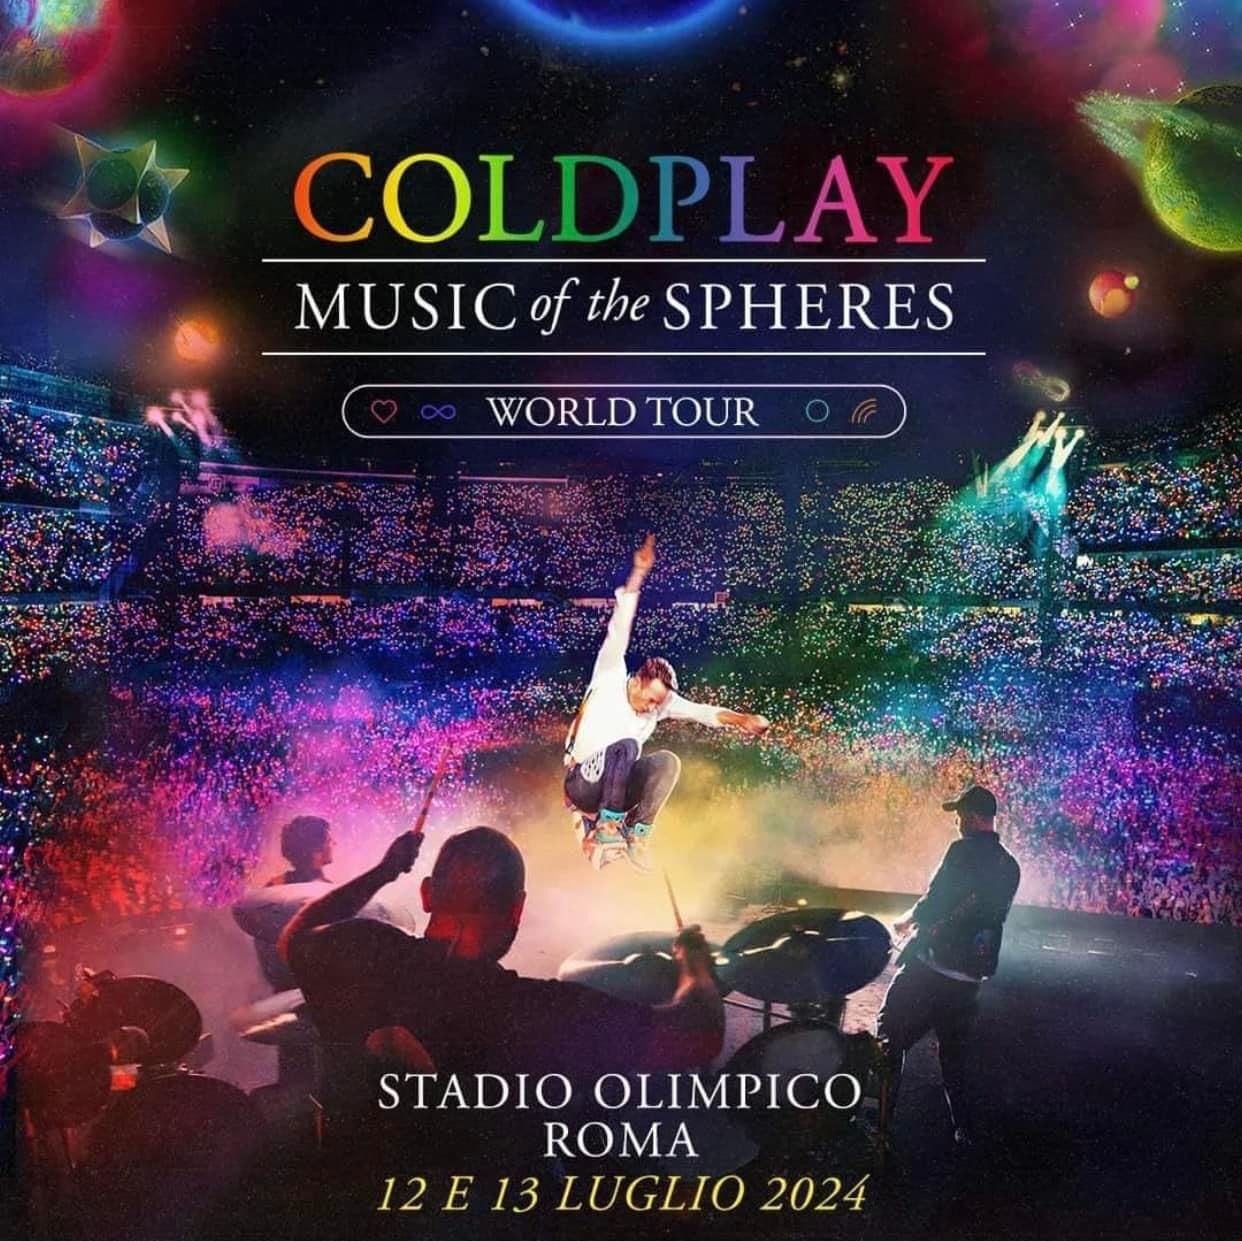 COLDPLAY-MUSIC OF THE SPHERES WORLD TOUR ROMA